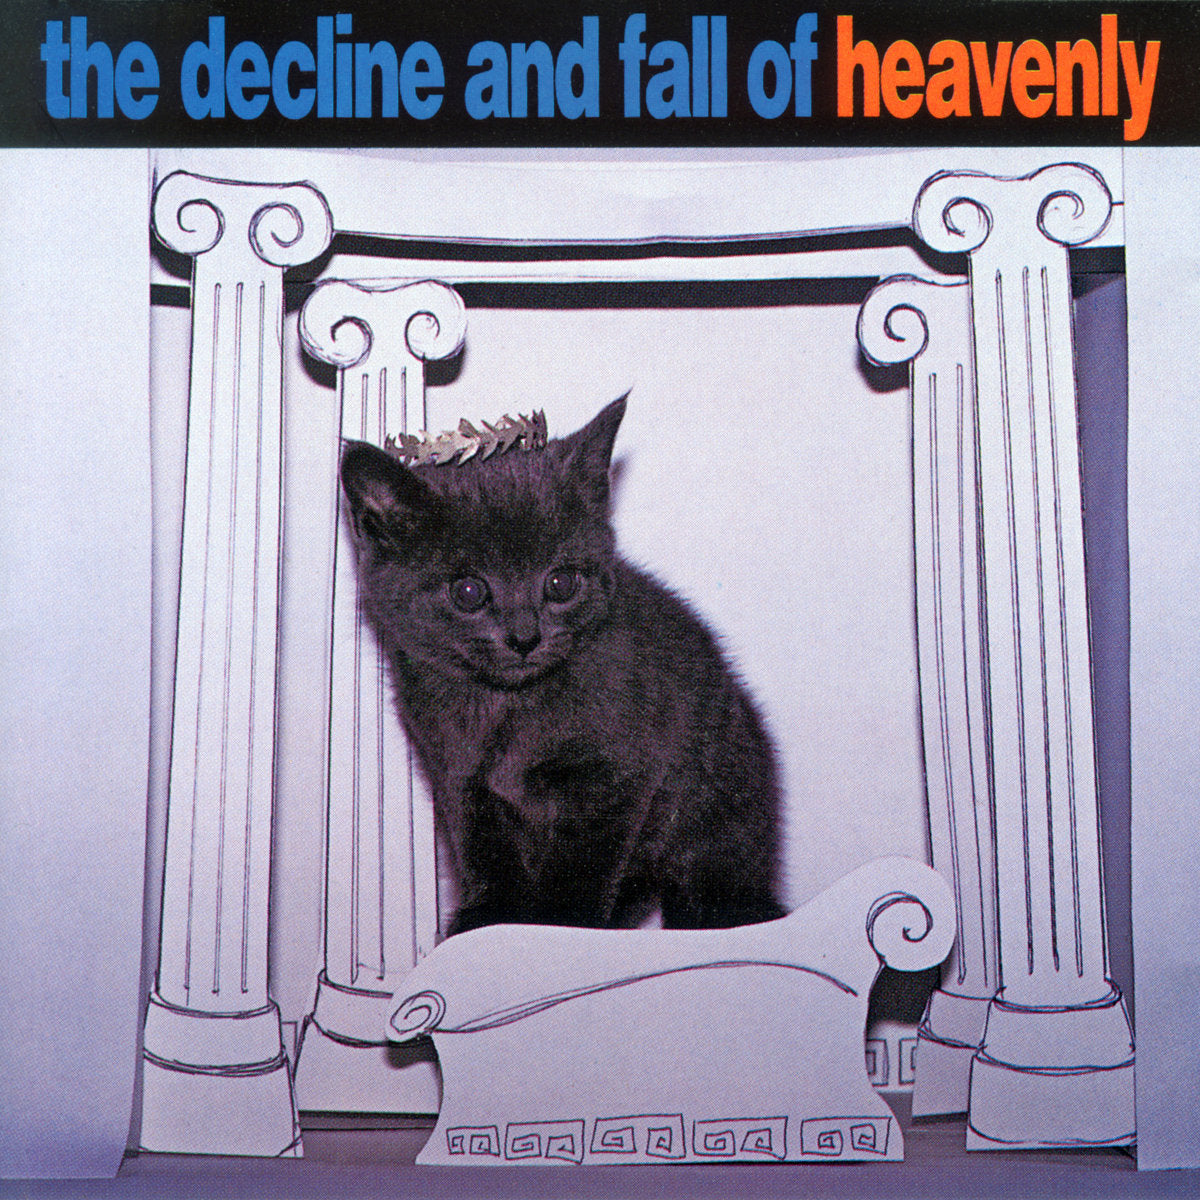 Heavenly "The Decline and Fall Of Heavenly"